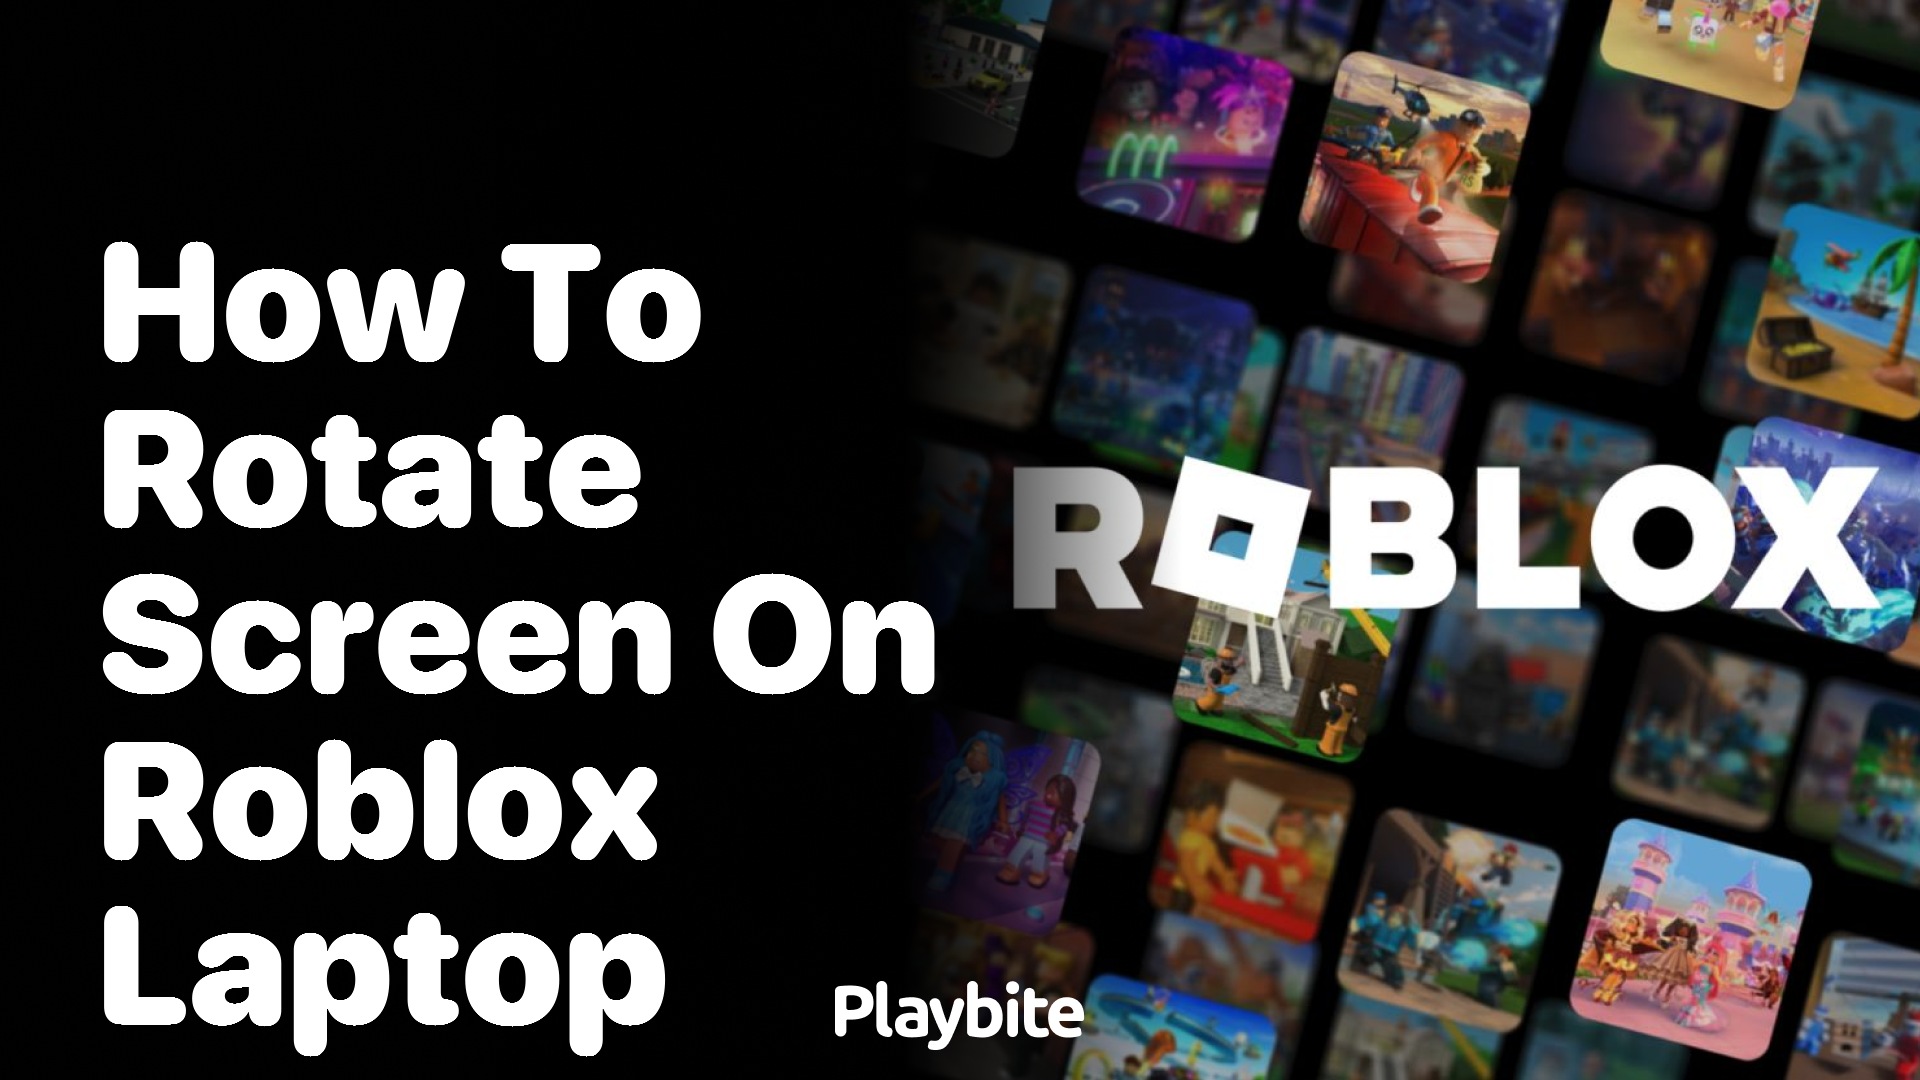 How to Rotate Screen on Roblox Laptop - Playbite